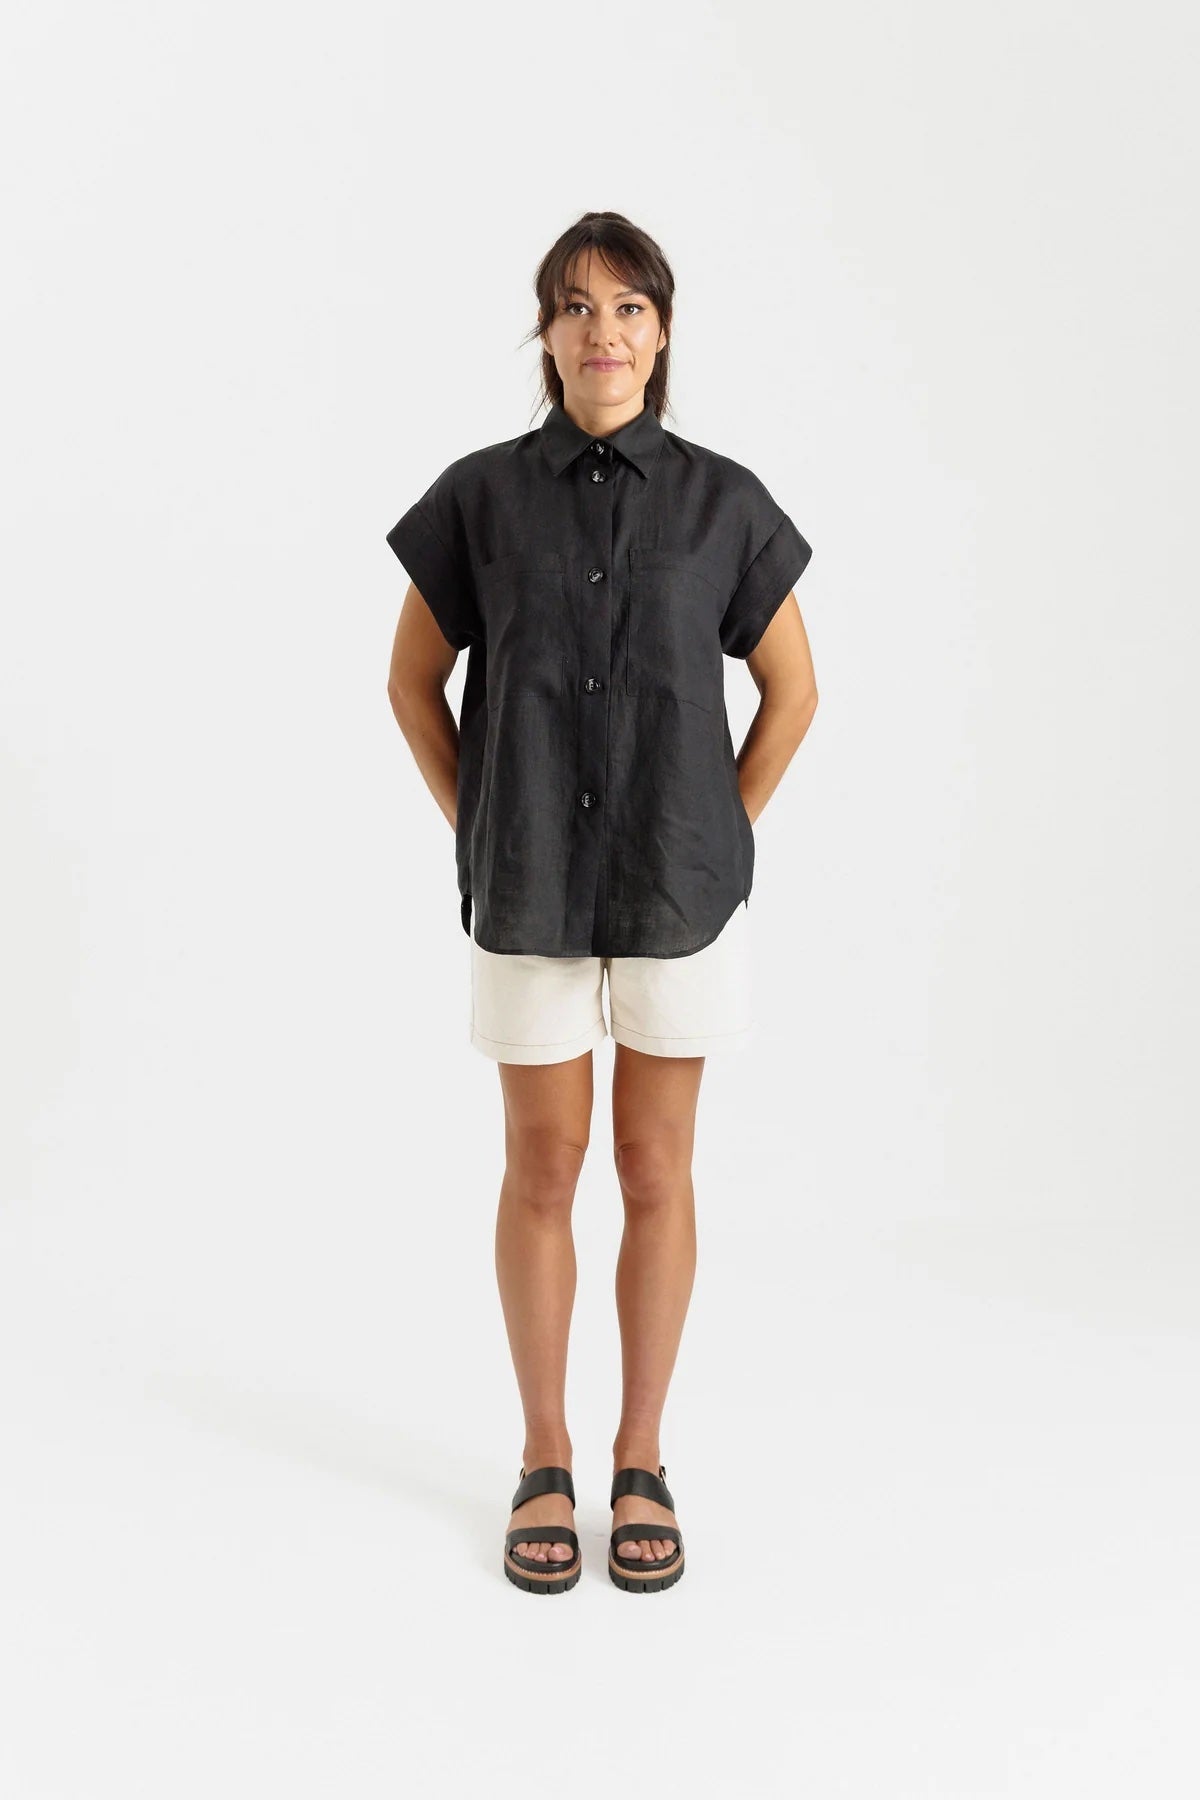 Woman wearing the Remy Shirt sewing pattern from Papercut Patterns on The Fold Line. A button front shirt pattern made in cotton, linen, denim, or flannel fabric, featuring drop shoulders with a cuff, a classic collar, patch pockets, and curved hem.